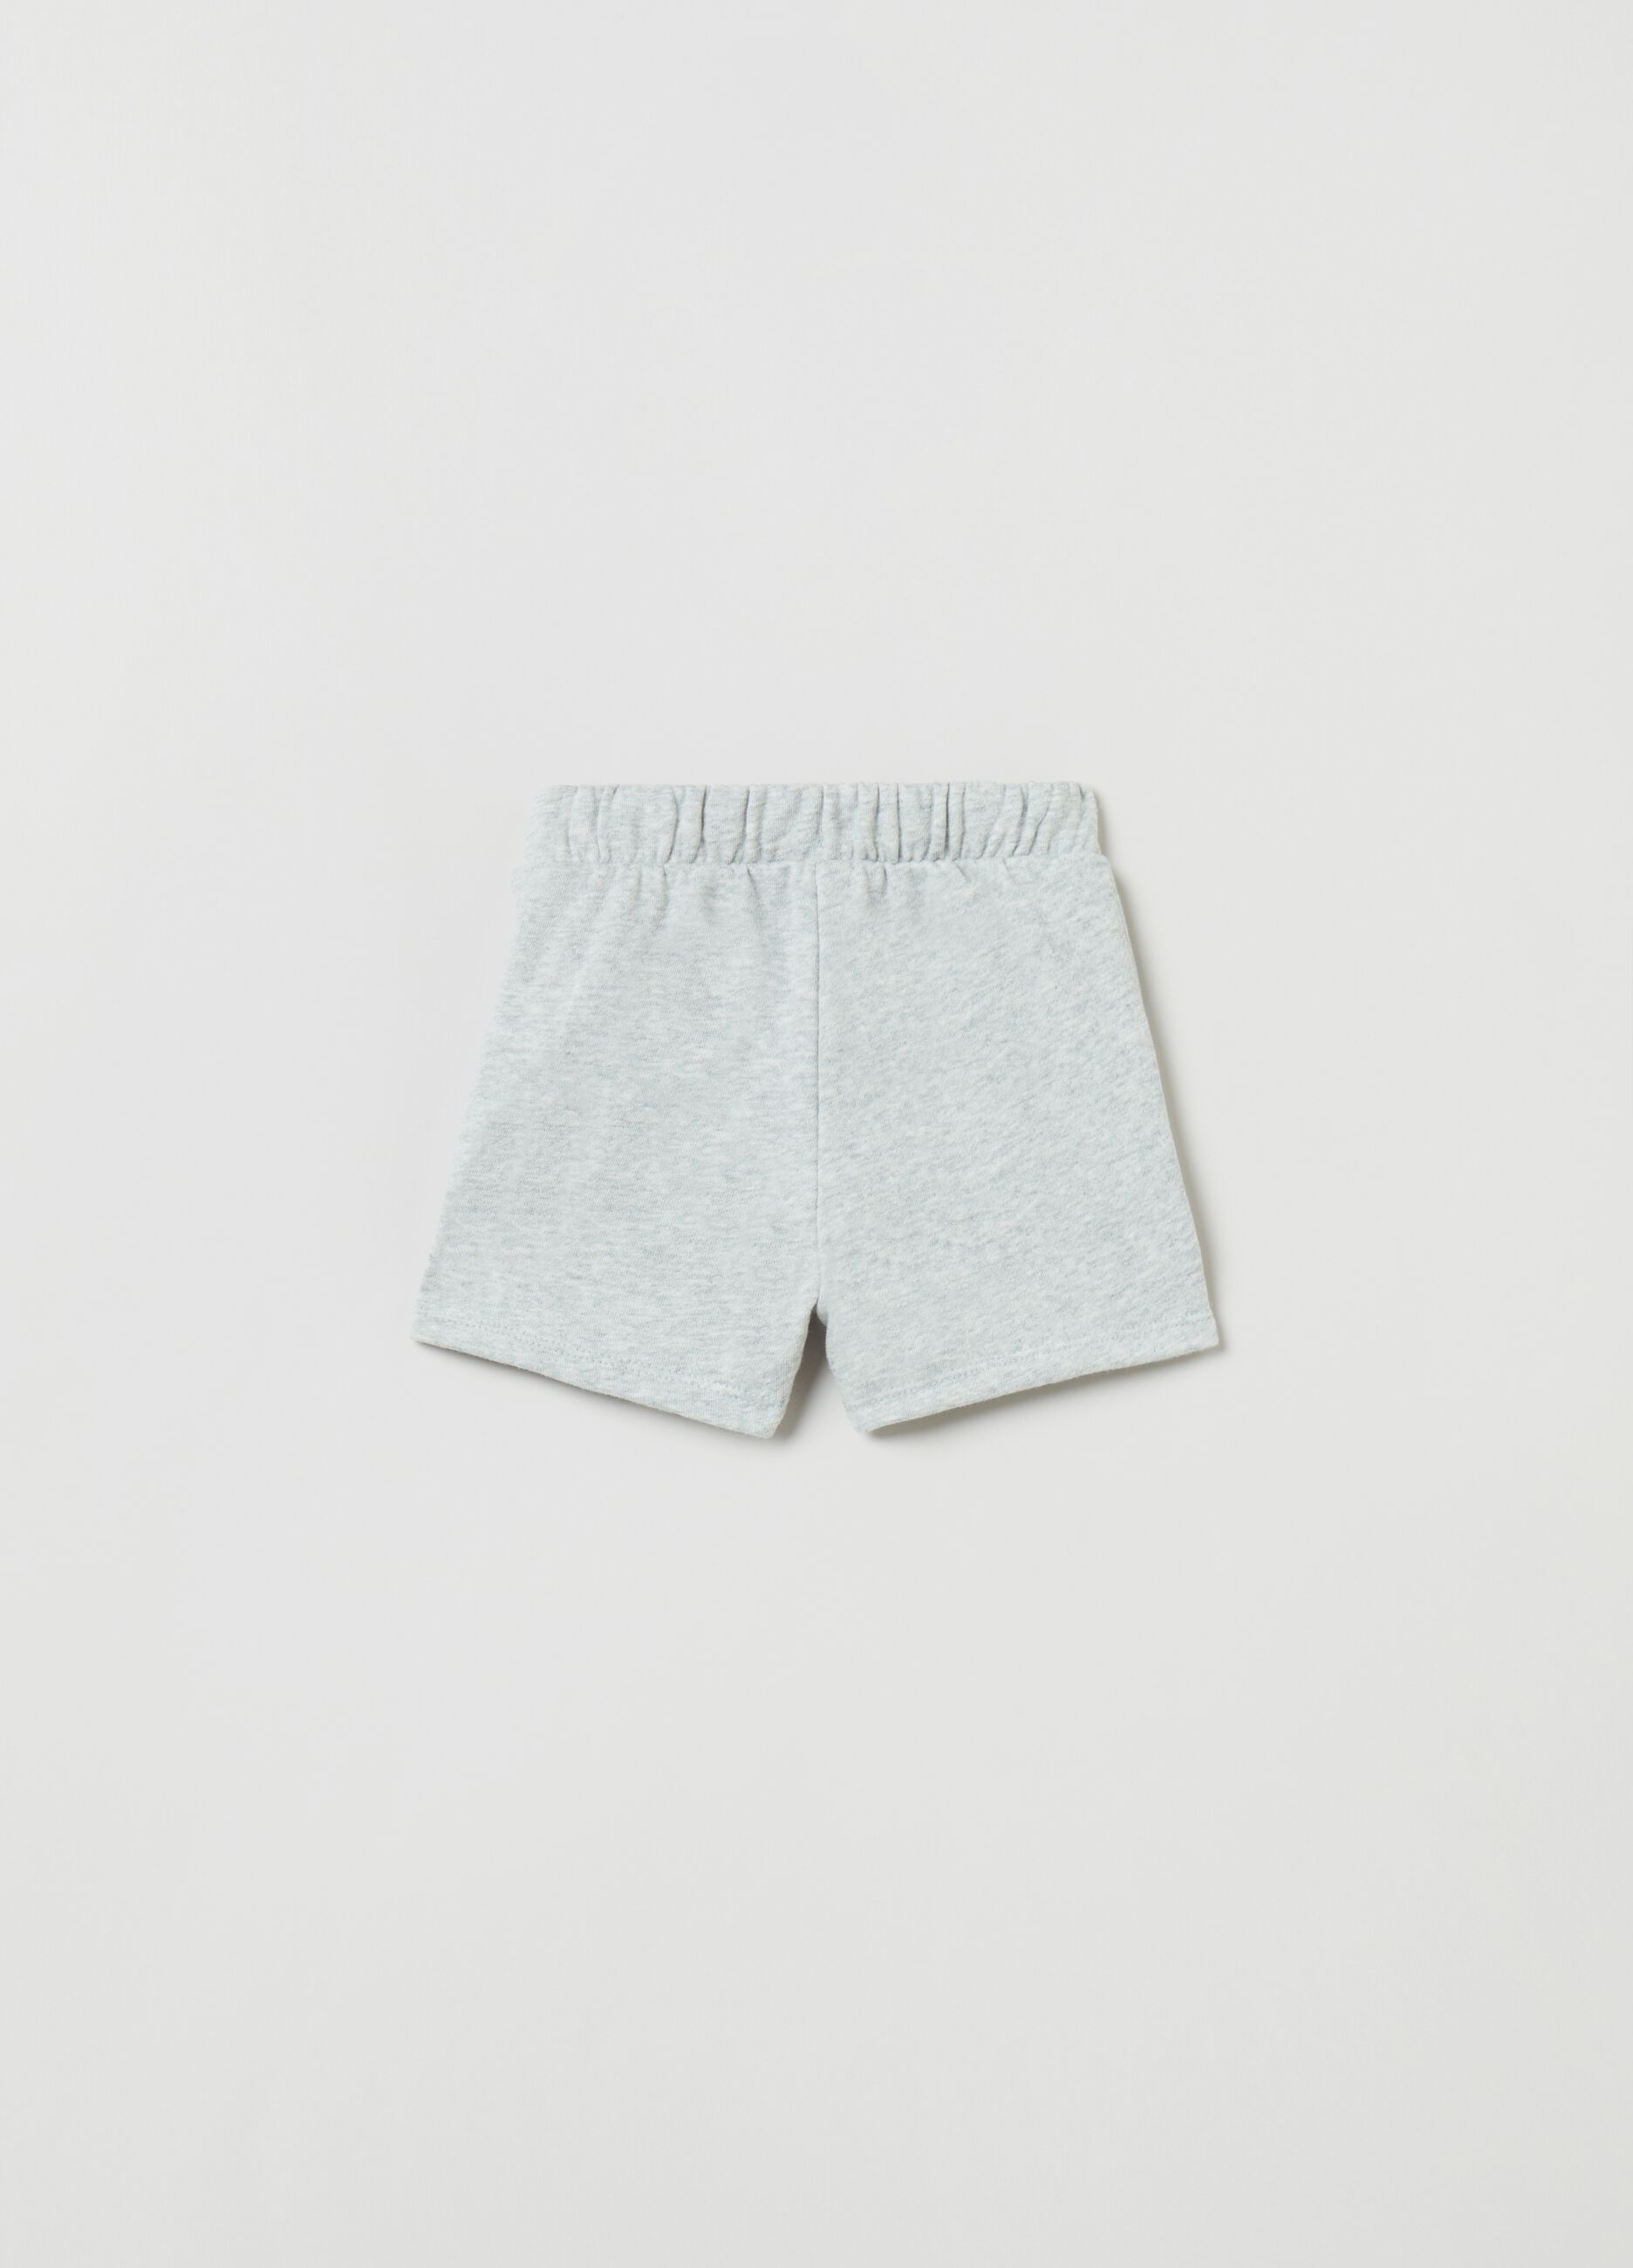 Shorts in French Terry with logo